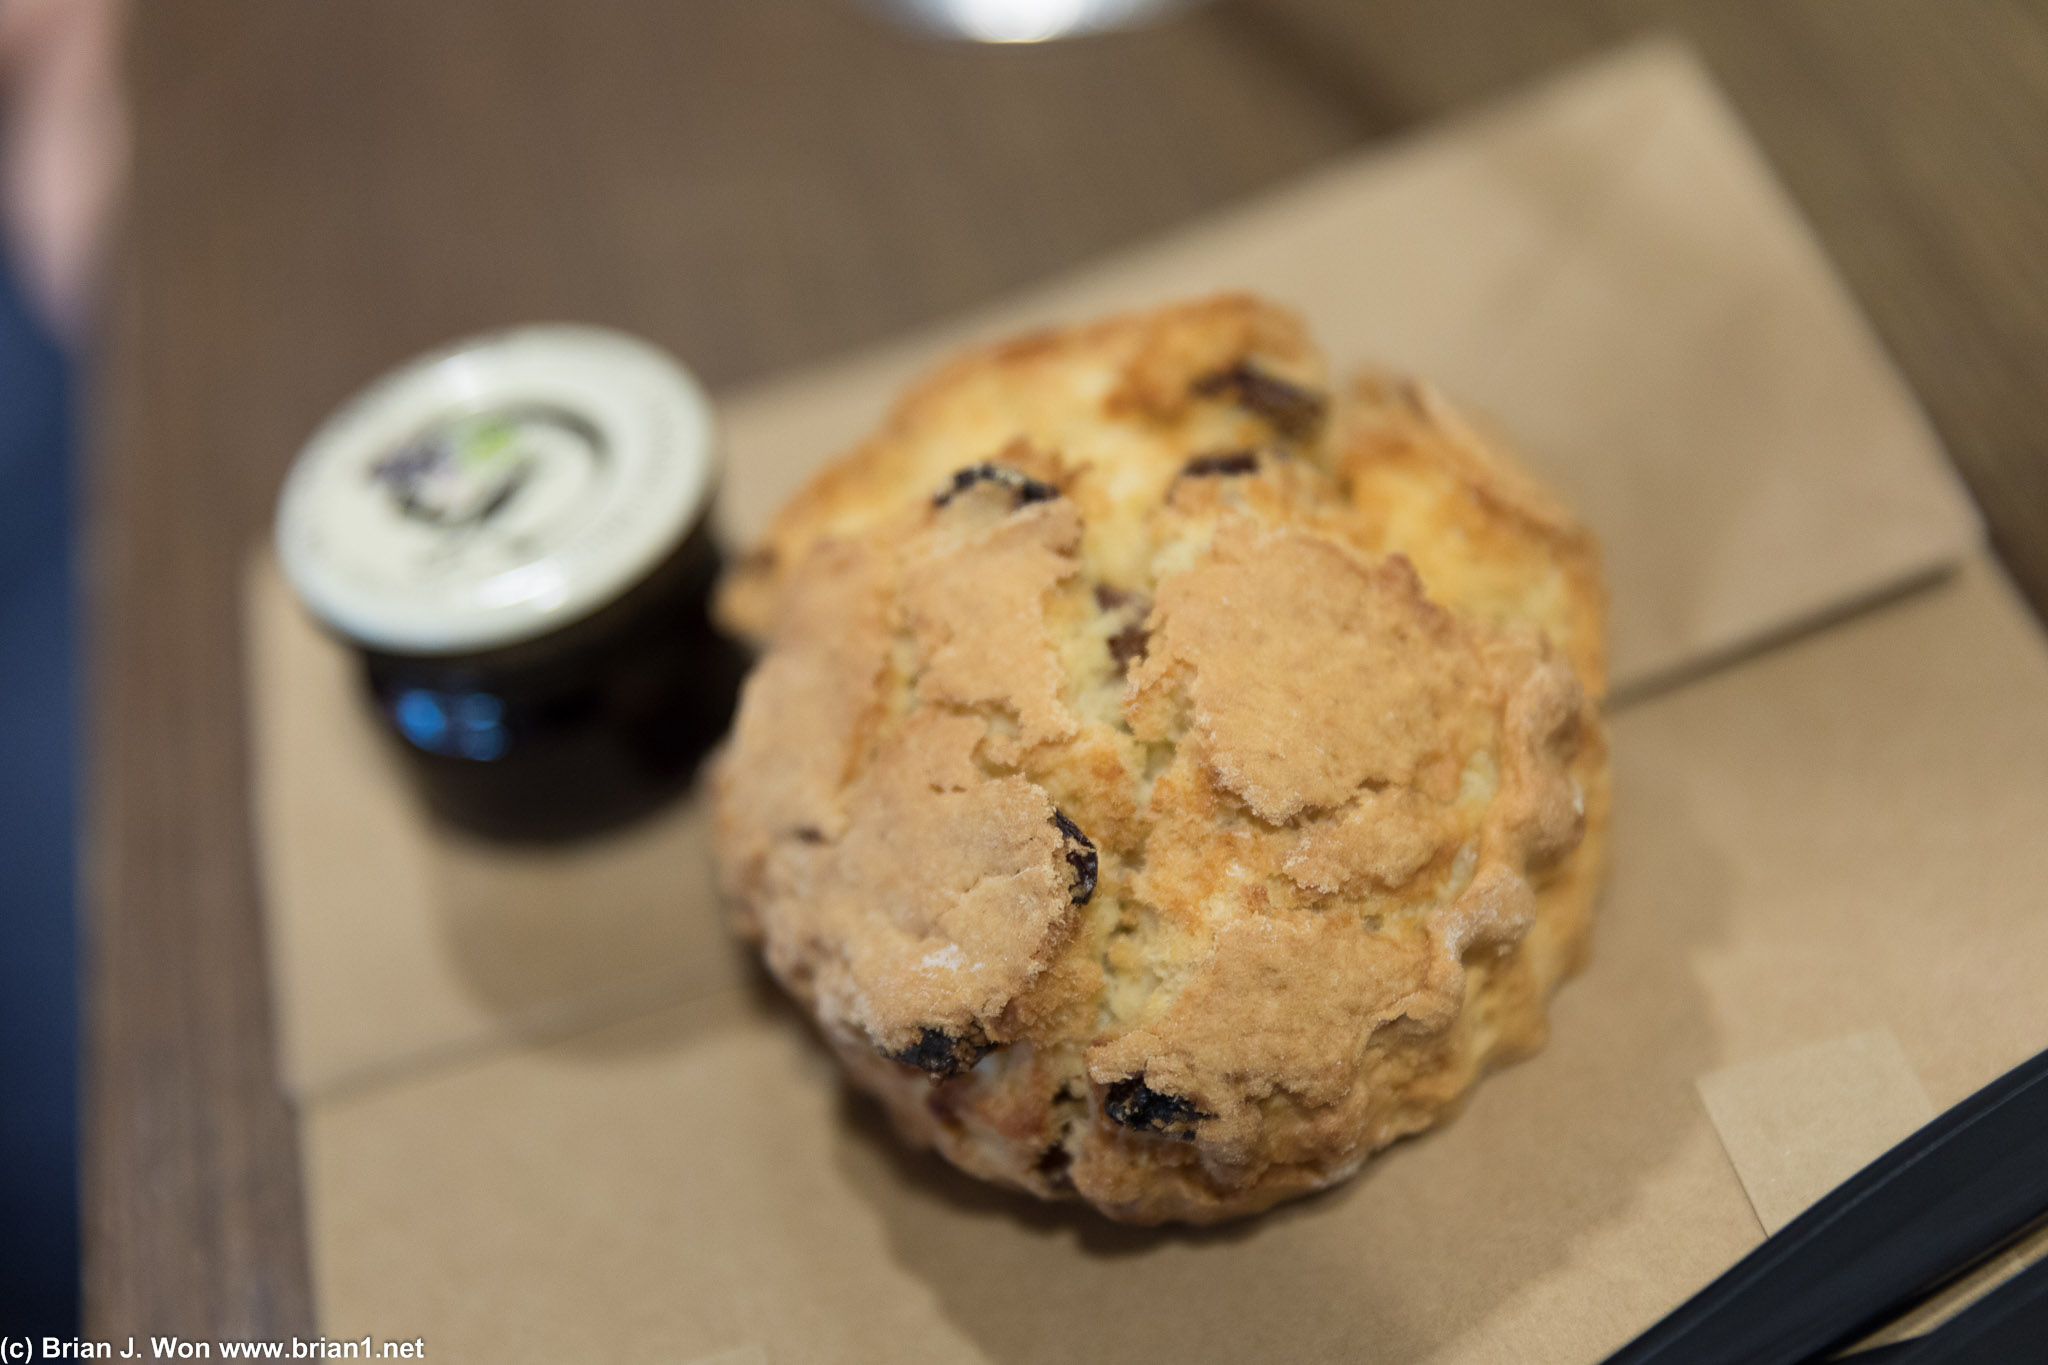 Scone was the only edible thing inside the airport's US Preclearance area.